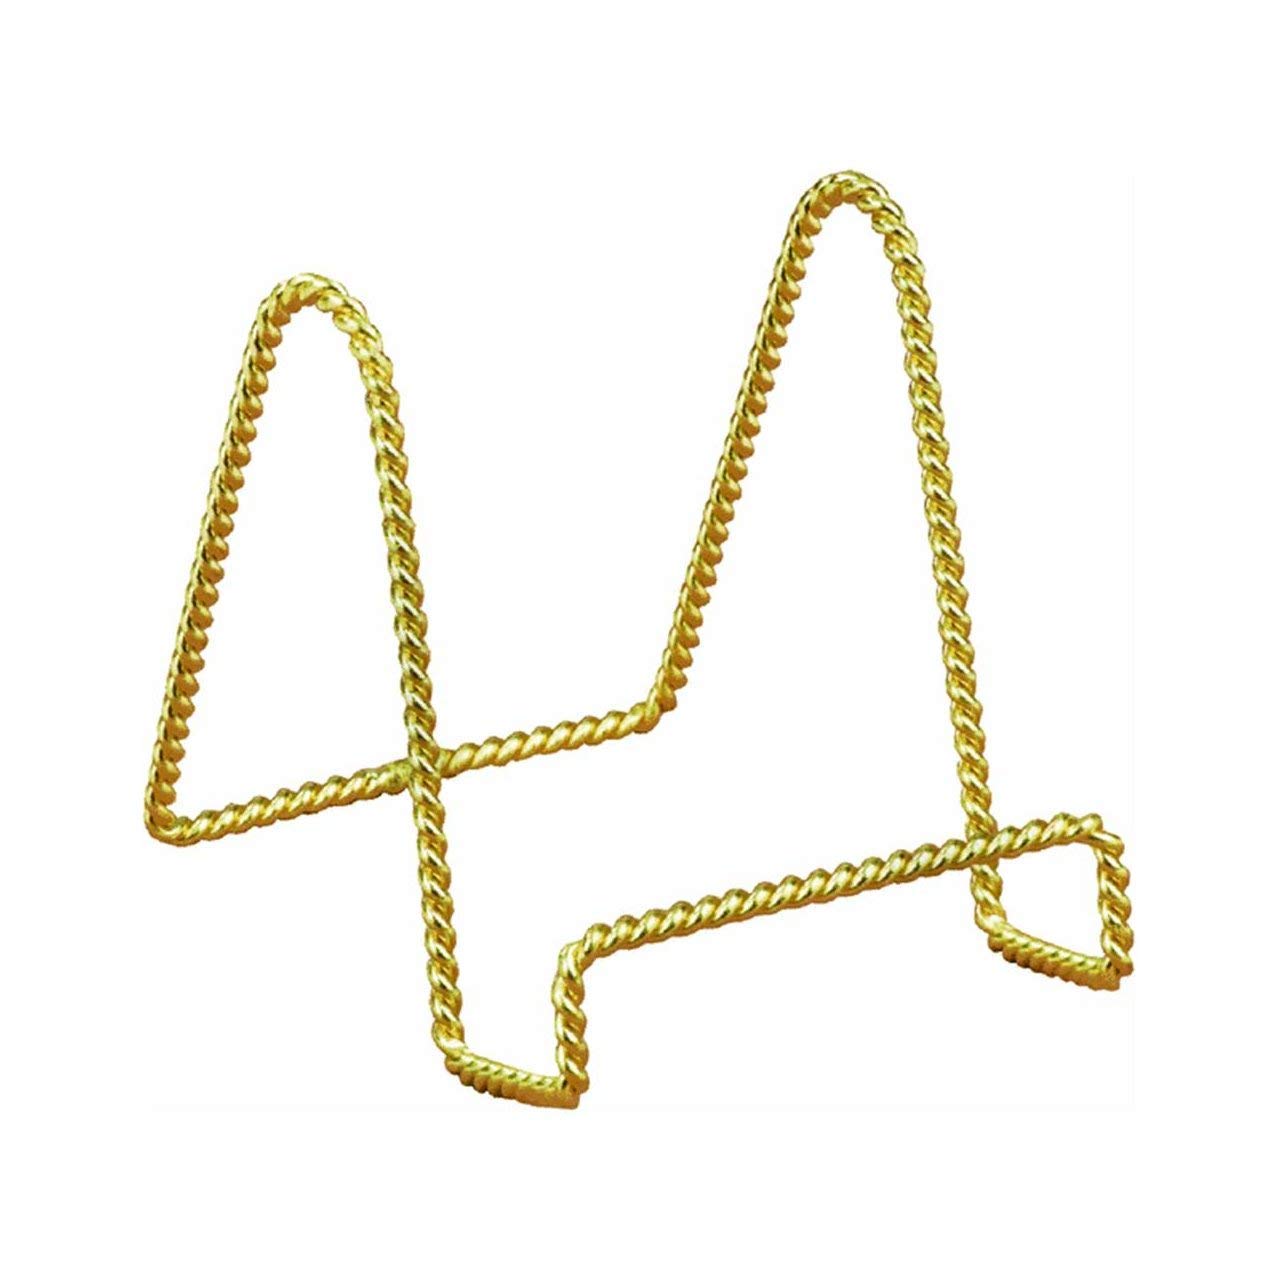 6" Twisted Gold Brass Wire Plate Stand - Royal Gift